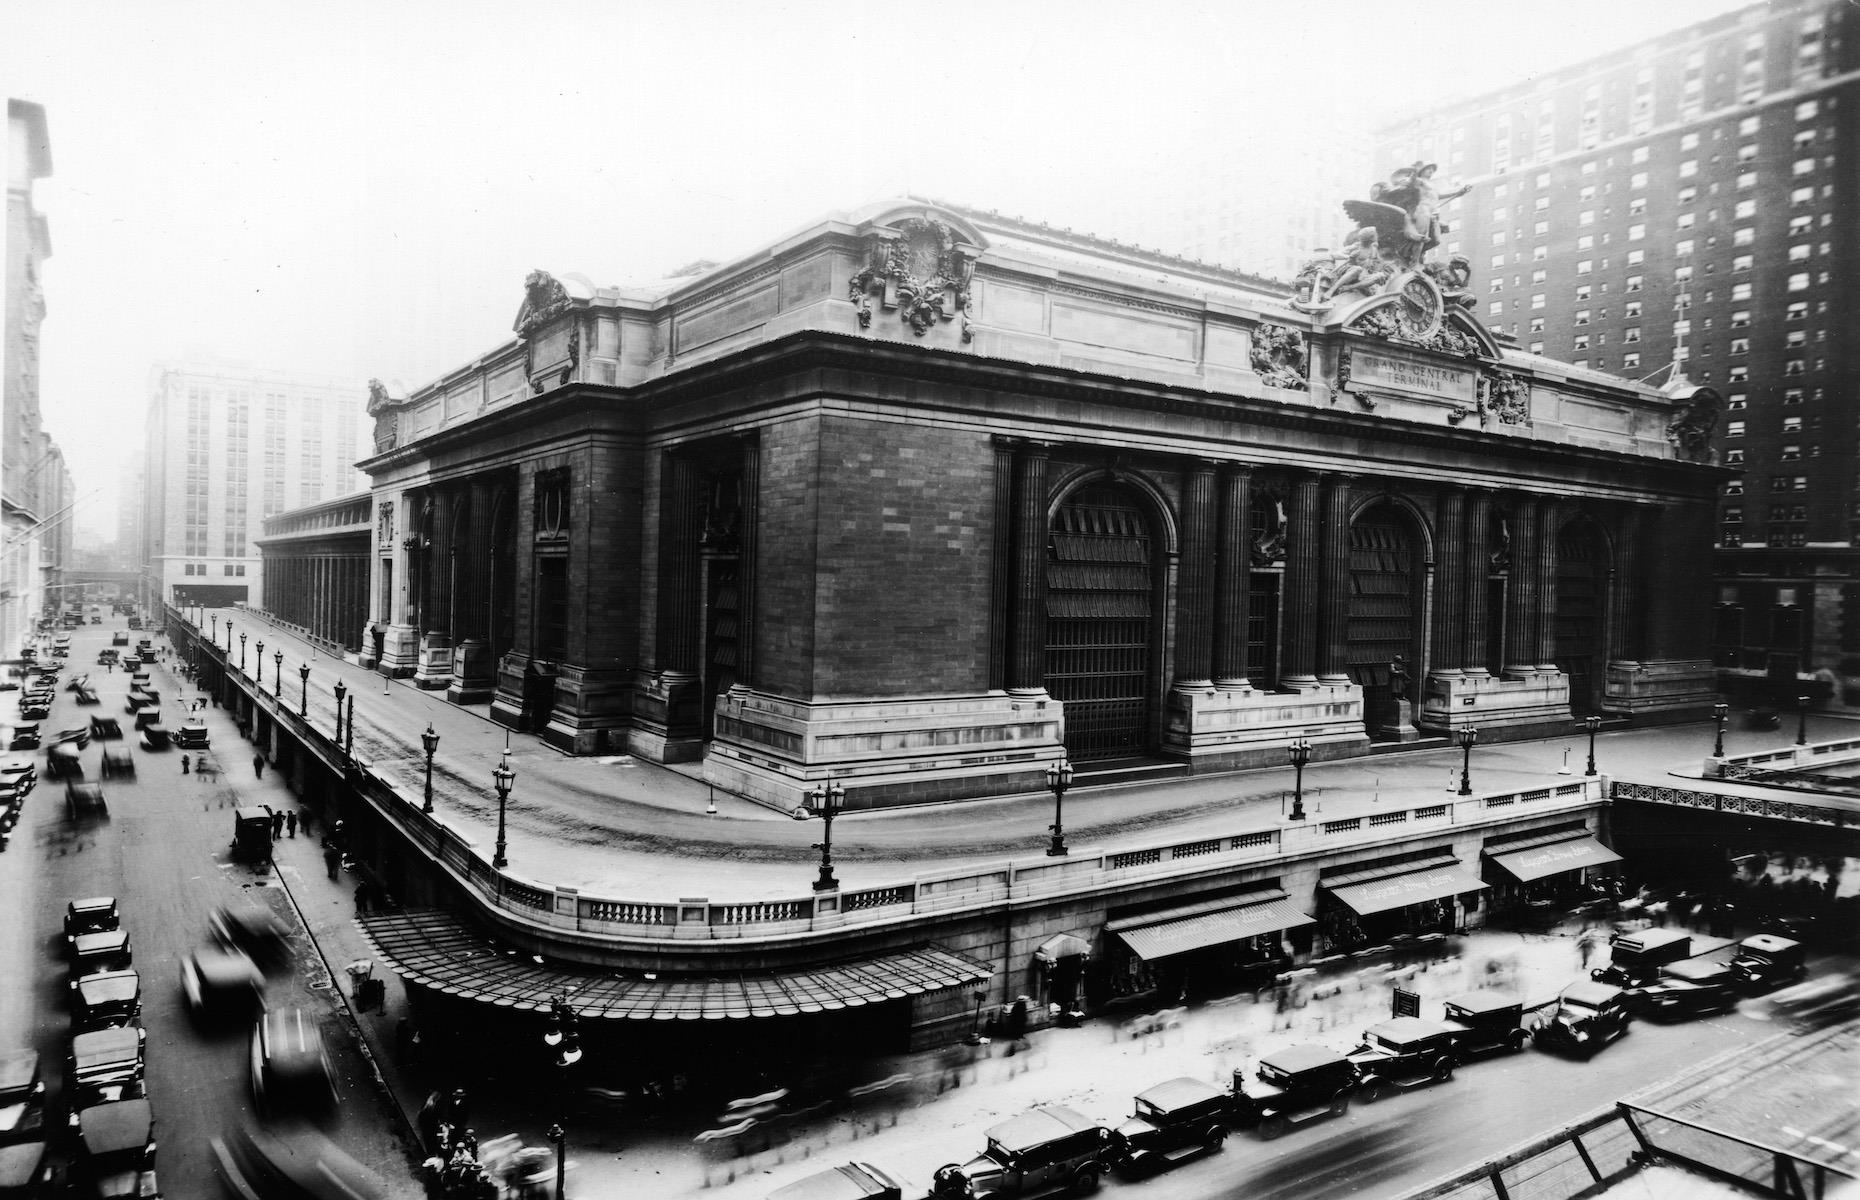 The first Grand Central Terminal was built in 1871 by shipping and railroad magnate Cornelius Vanderbilt, but the stunning New York landmark we know today opened to the public in 1913. More than 150,000 people went along to celebrate the opening of the Beaux-Arts-style terminus. In the 1930s, its boom years, Grand Central Terminal became the busiest train station in the country and housed an art gallery, newsreel movie theater and a rail history museum.